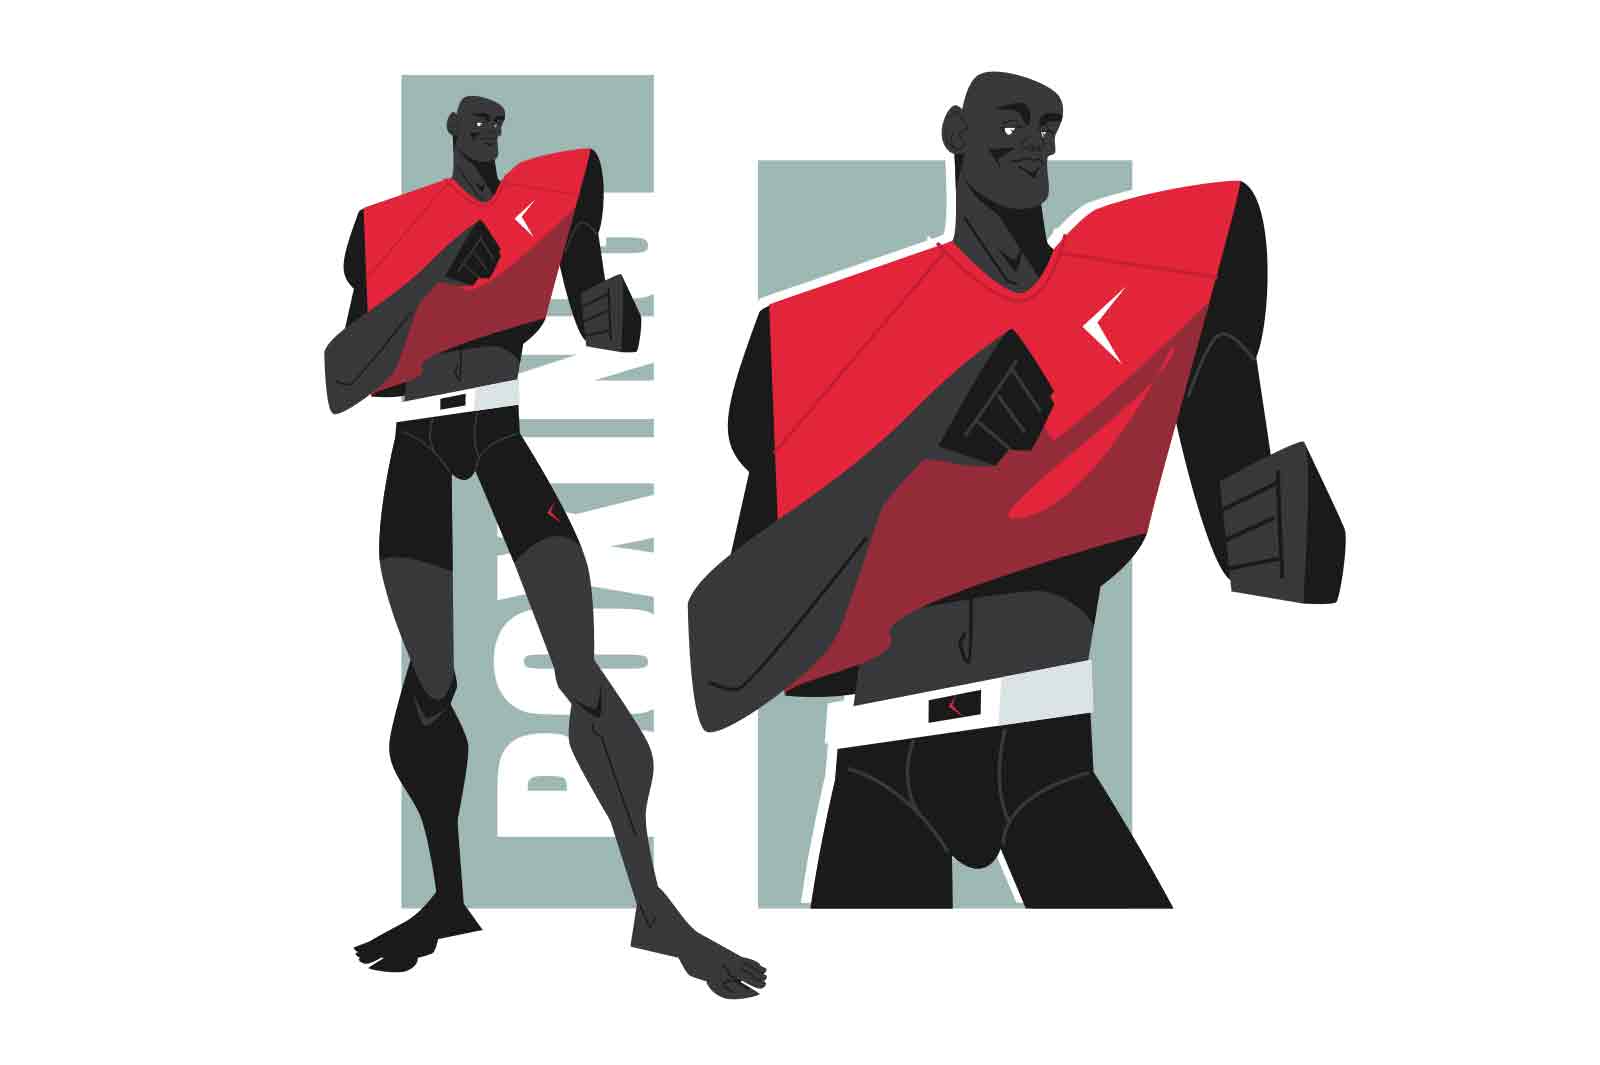 Boxer preparing to fight, vector illustration. Tall guy in sport clothes accercises boxing moves.